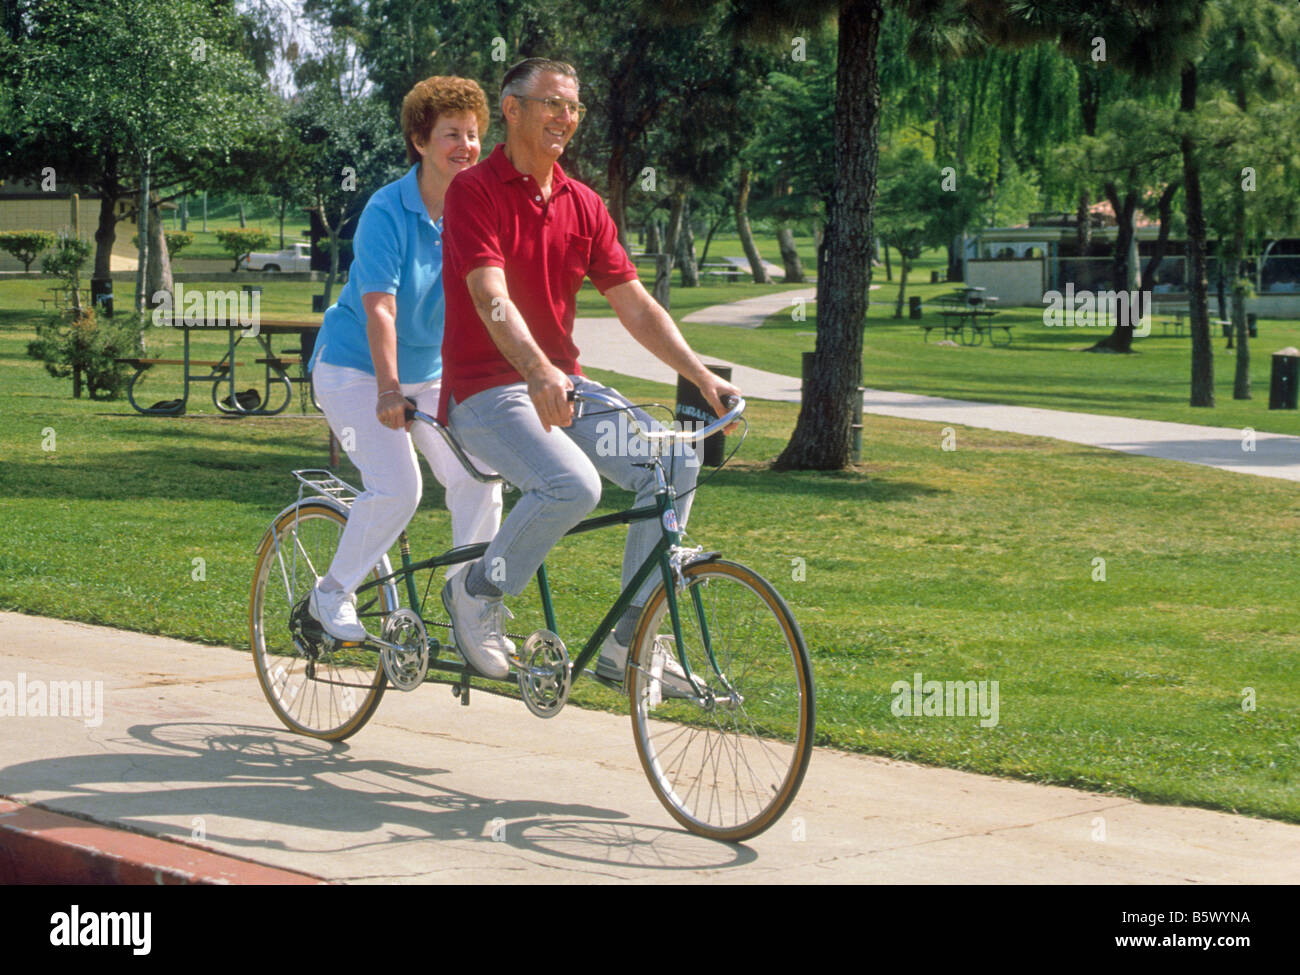 Senior couple ride tandem bicycle built for two in park. Stock Photo